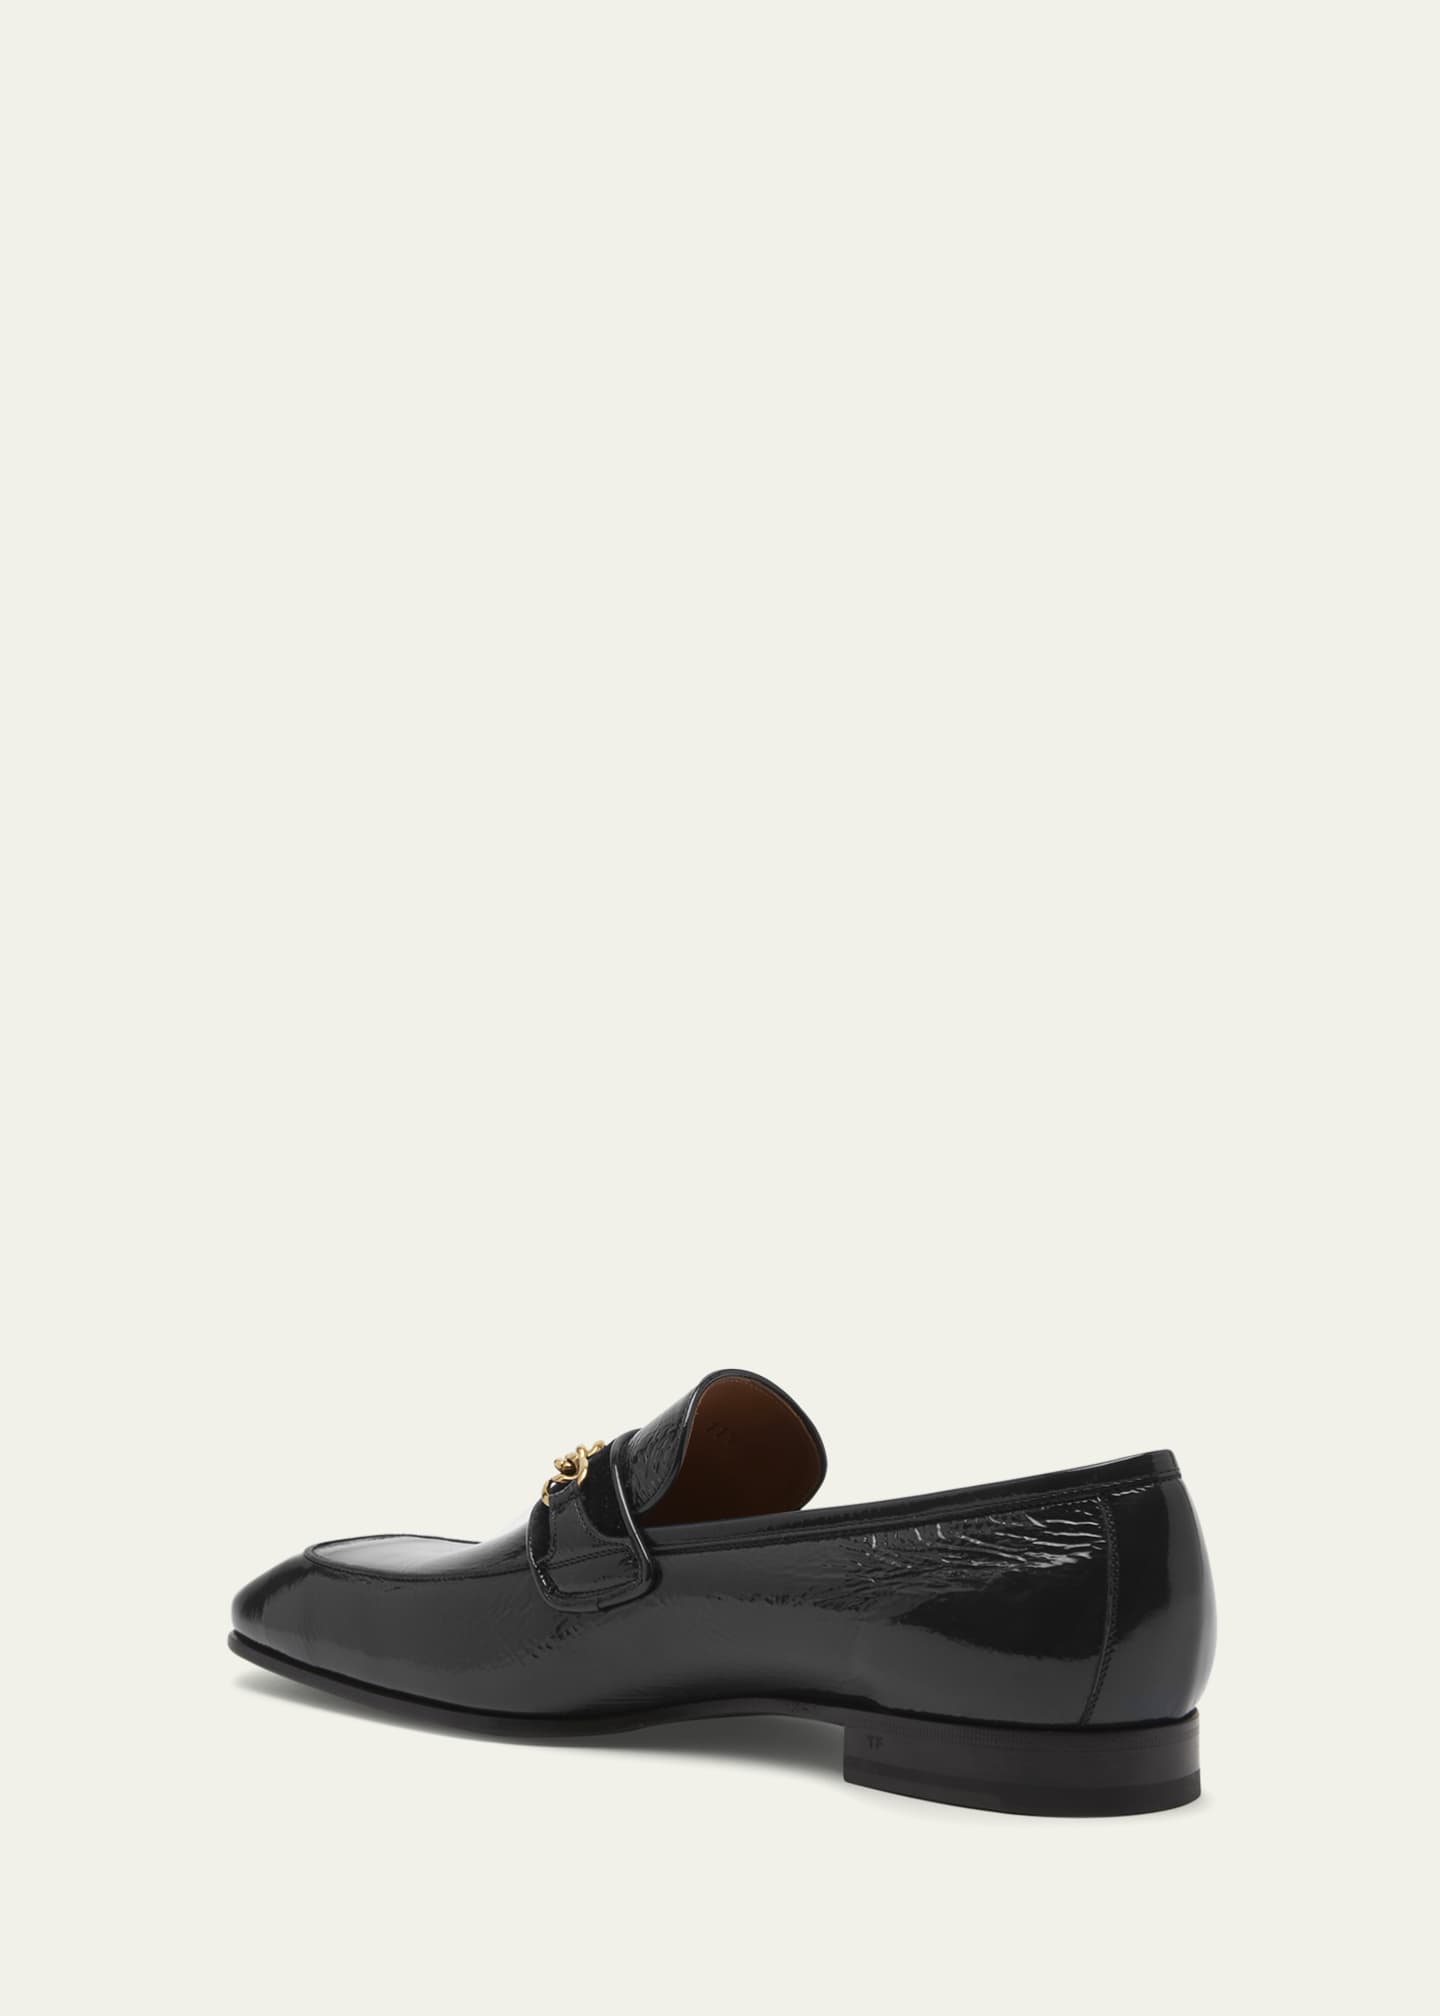 TOM FORD Men's Bailey Glossy Leather Chain Loafers - Bergdorf Goodman